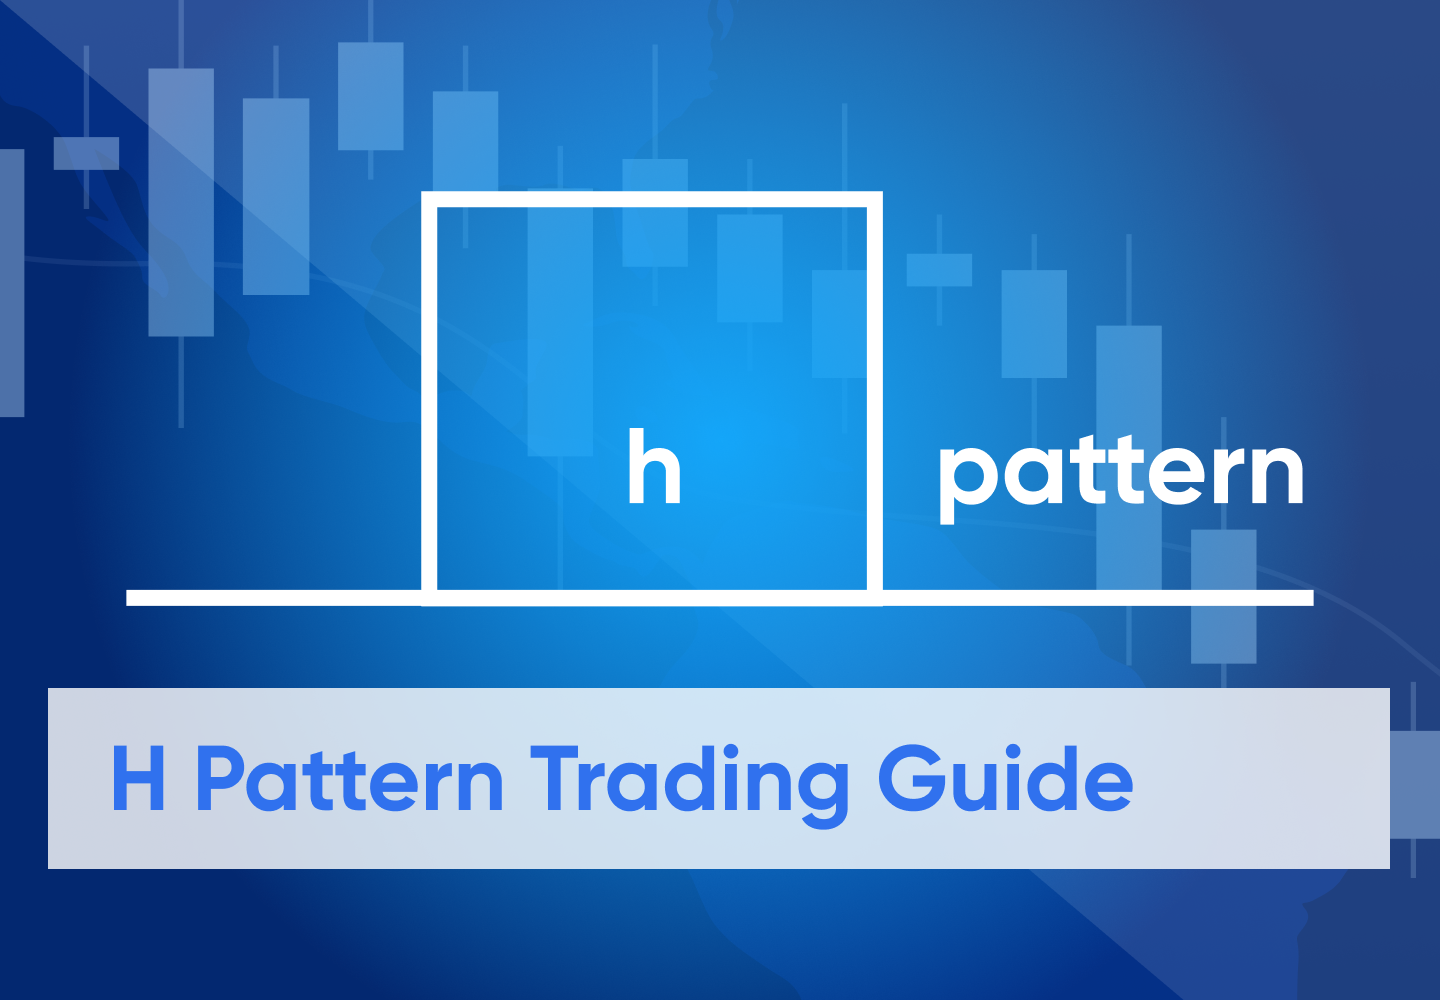 H Pattern Trading Guide